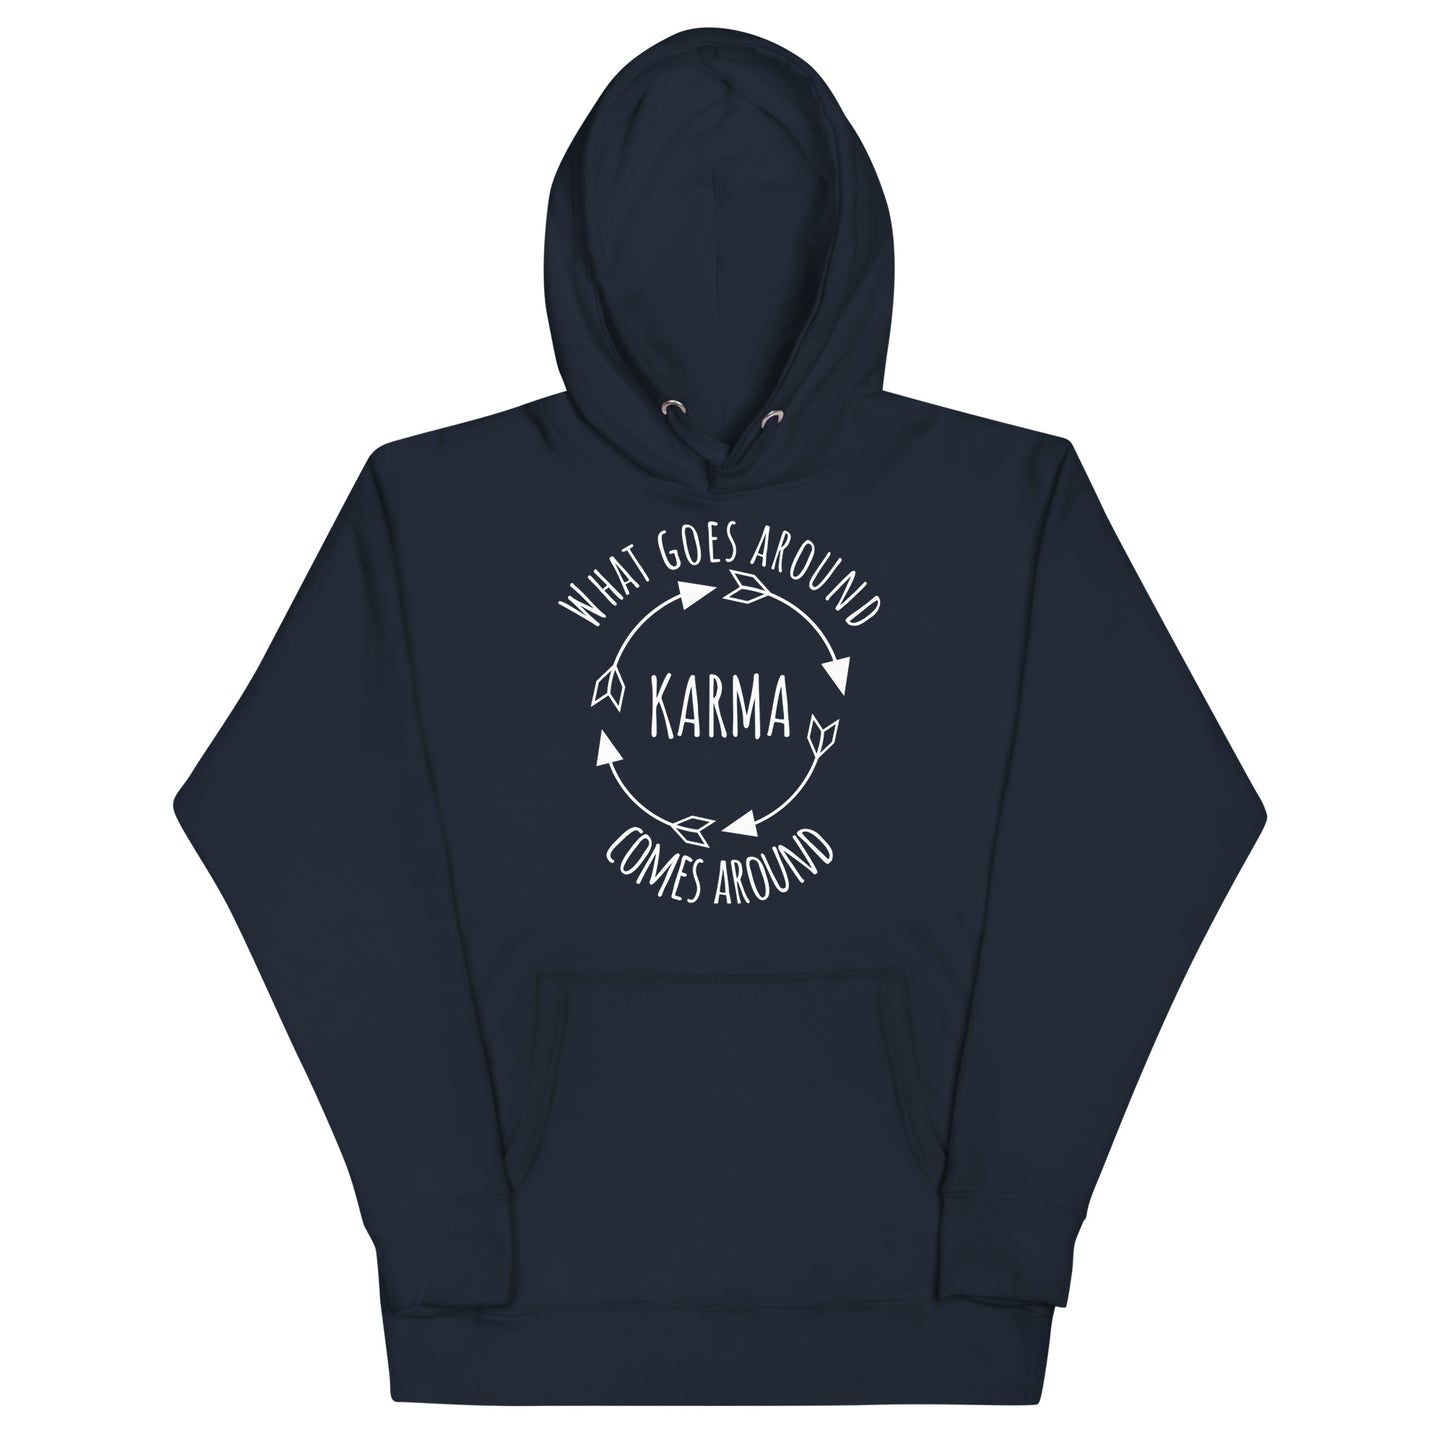 KARMA - What goes around comes around Unisex Hoodie (white lettering)